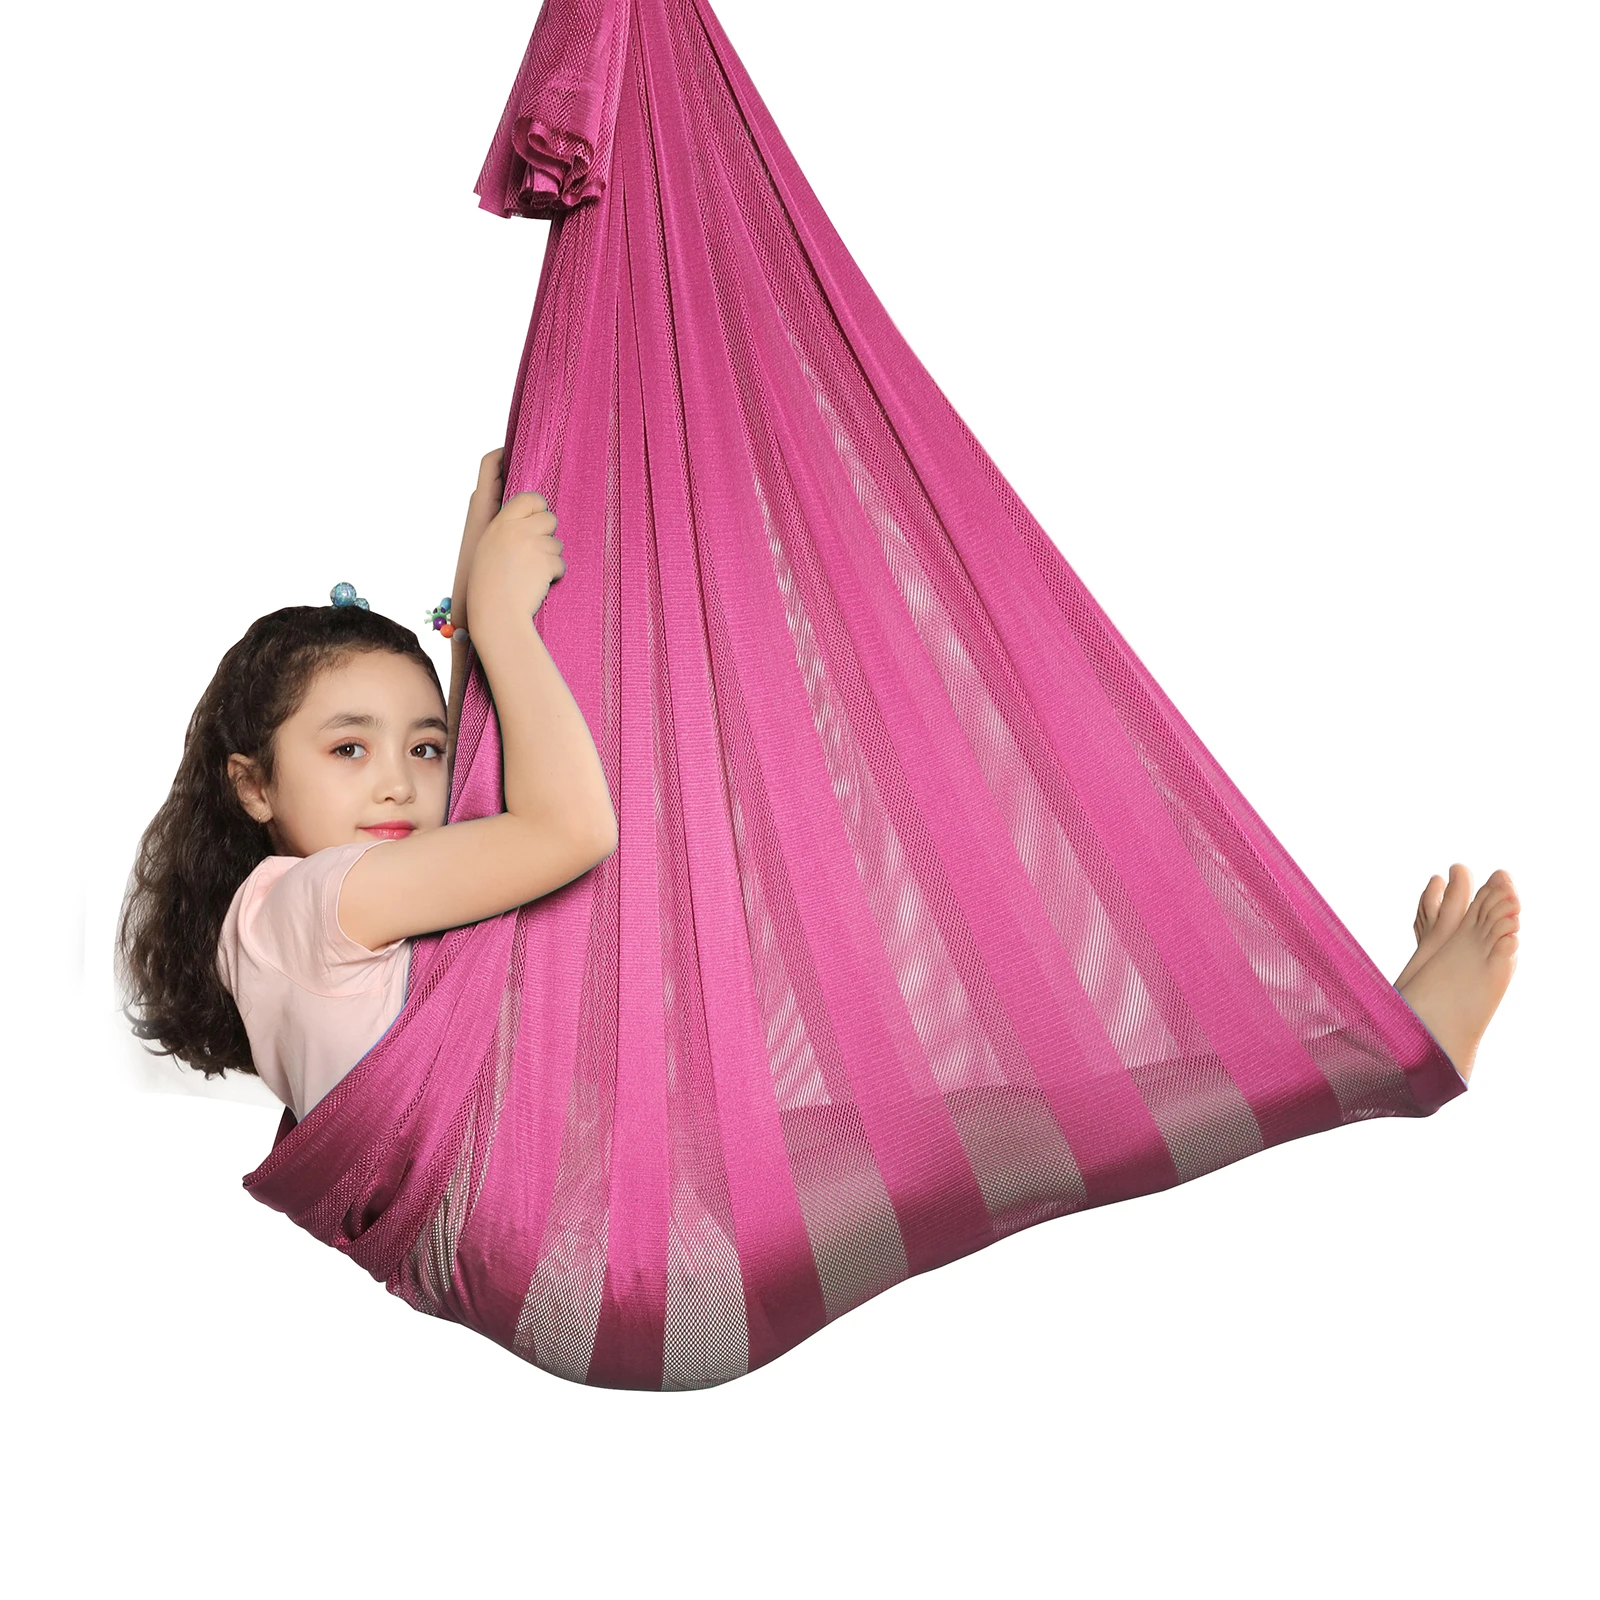 Therapy Swing for Kids Indoor Sensory Swing Hammock for Children  Hanging Cuddle Hammock for Autism ADHD Asperger's Syndrome SPD 